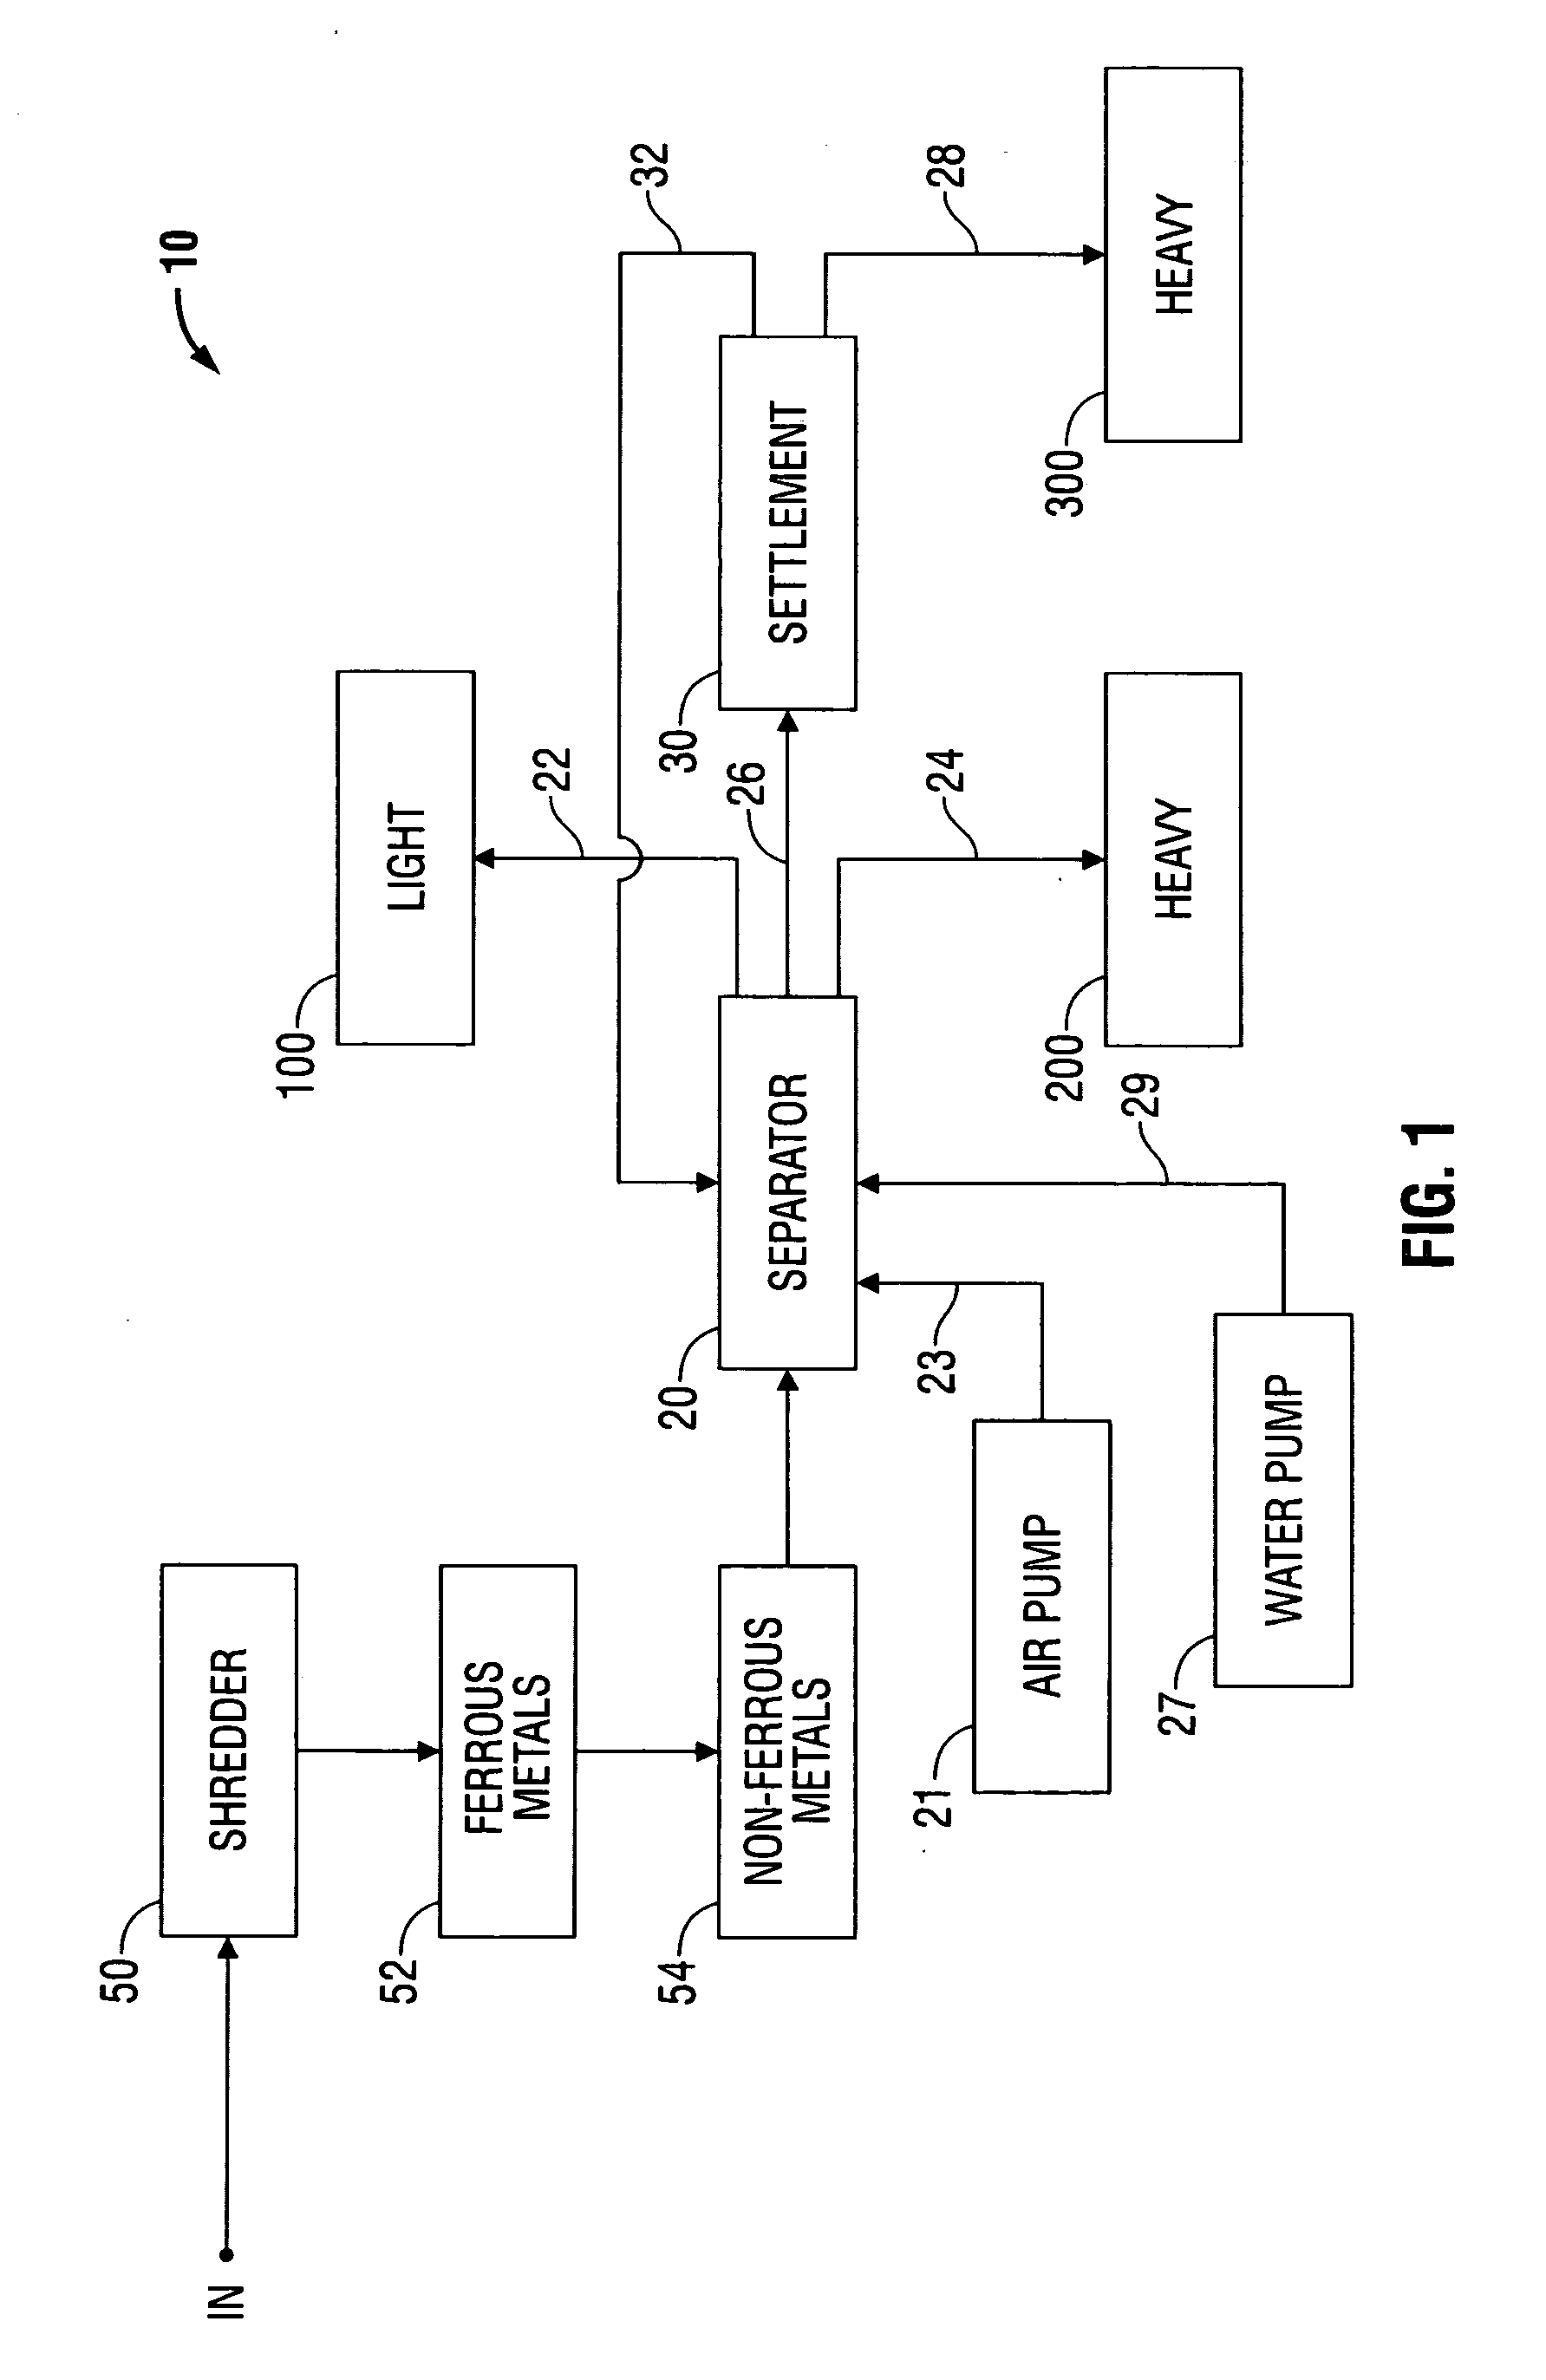 System and method for separation and handling of construction, demolition and garbage materials